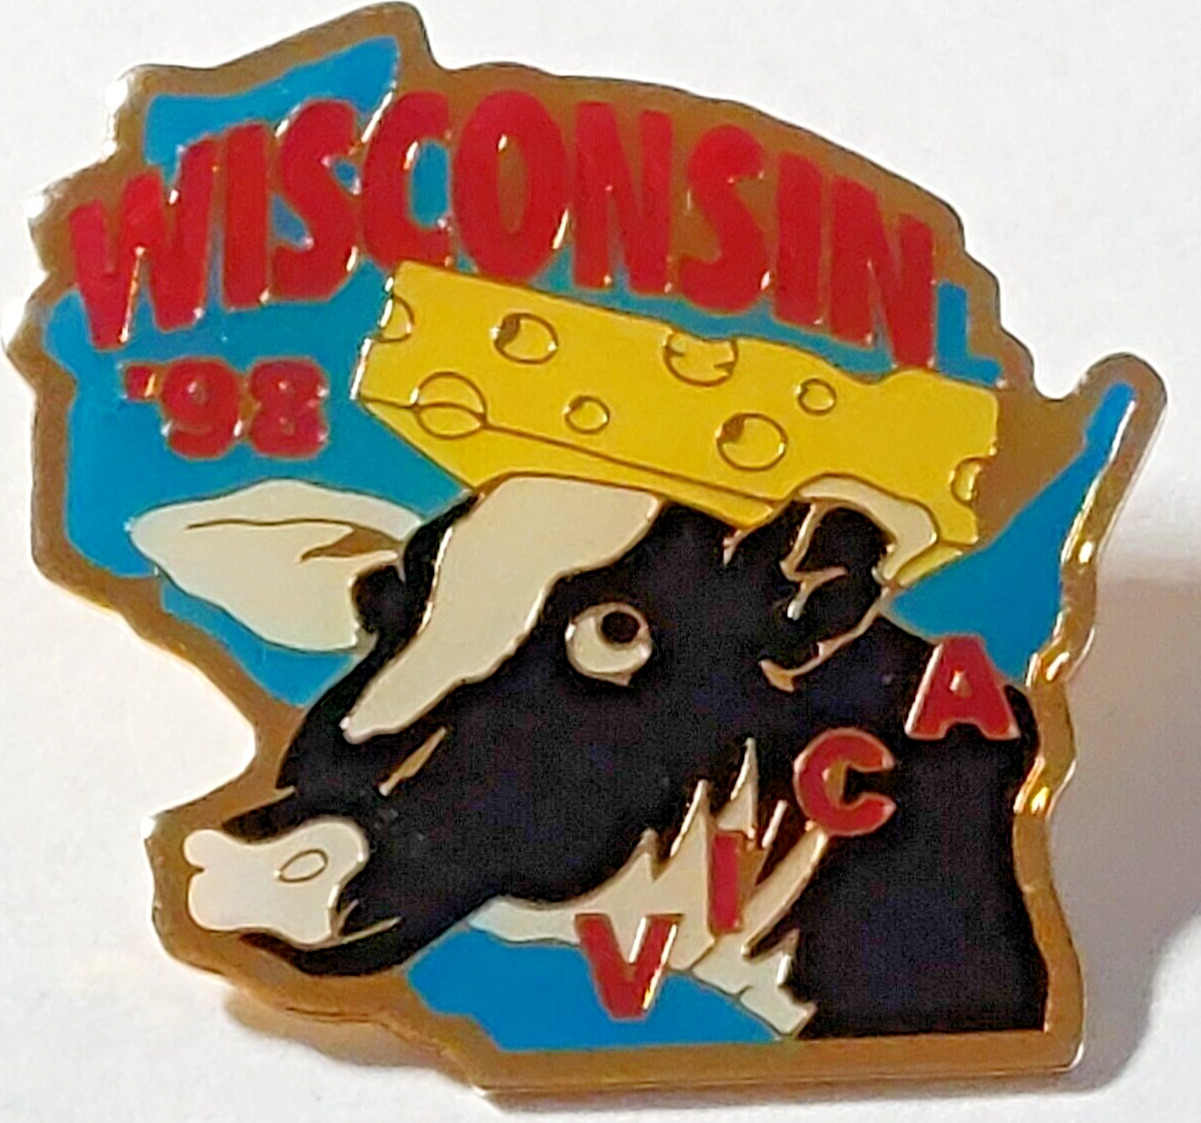 VICA (Vocational Industrial Clubs of America) 1998 Wisconsin Lapel Pin